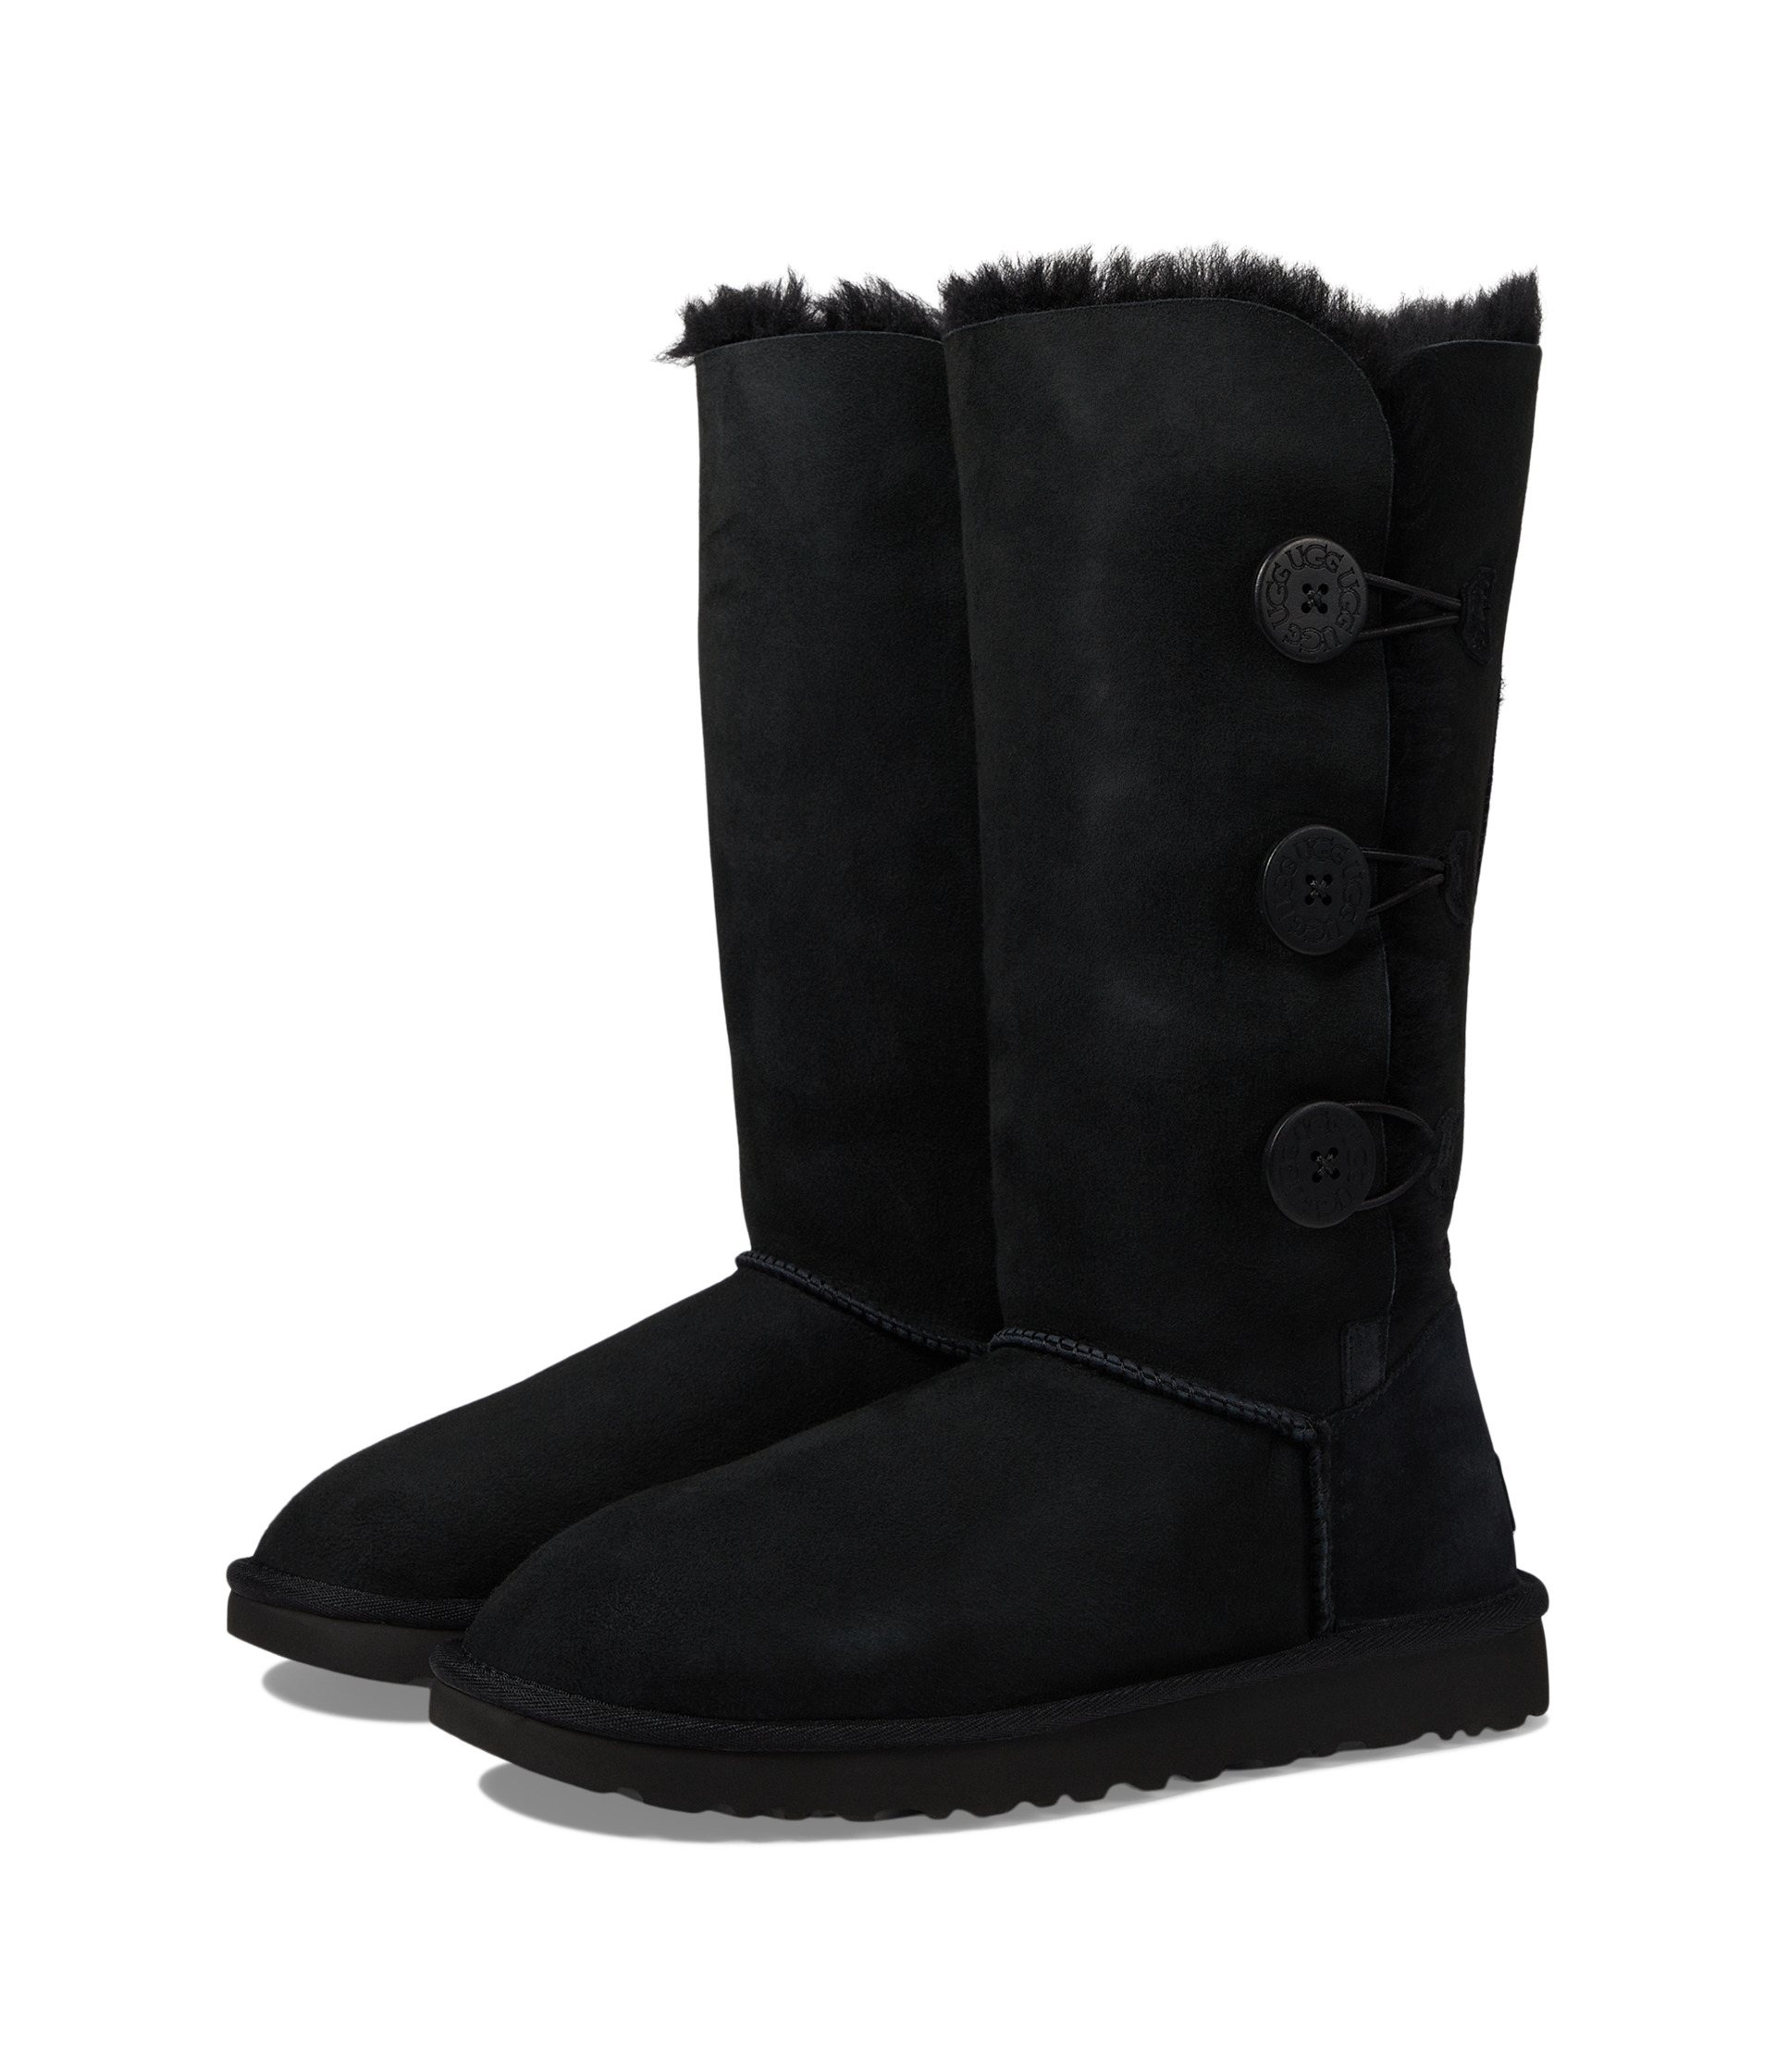 UGG Bailey Button Triplet II at Zappos.com